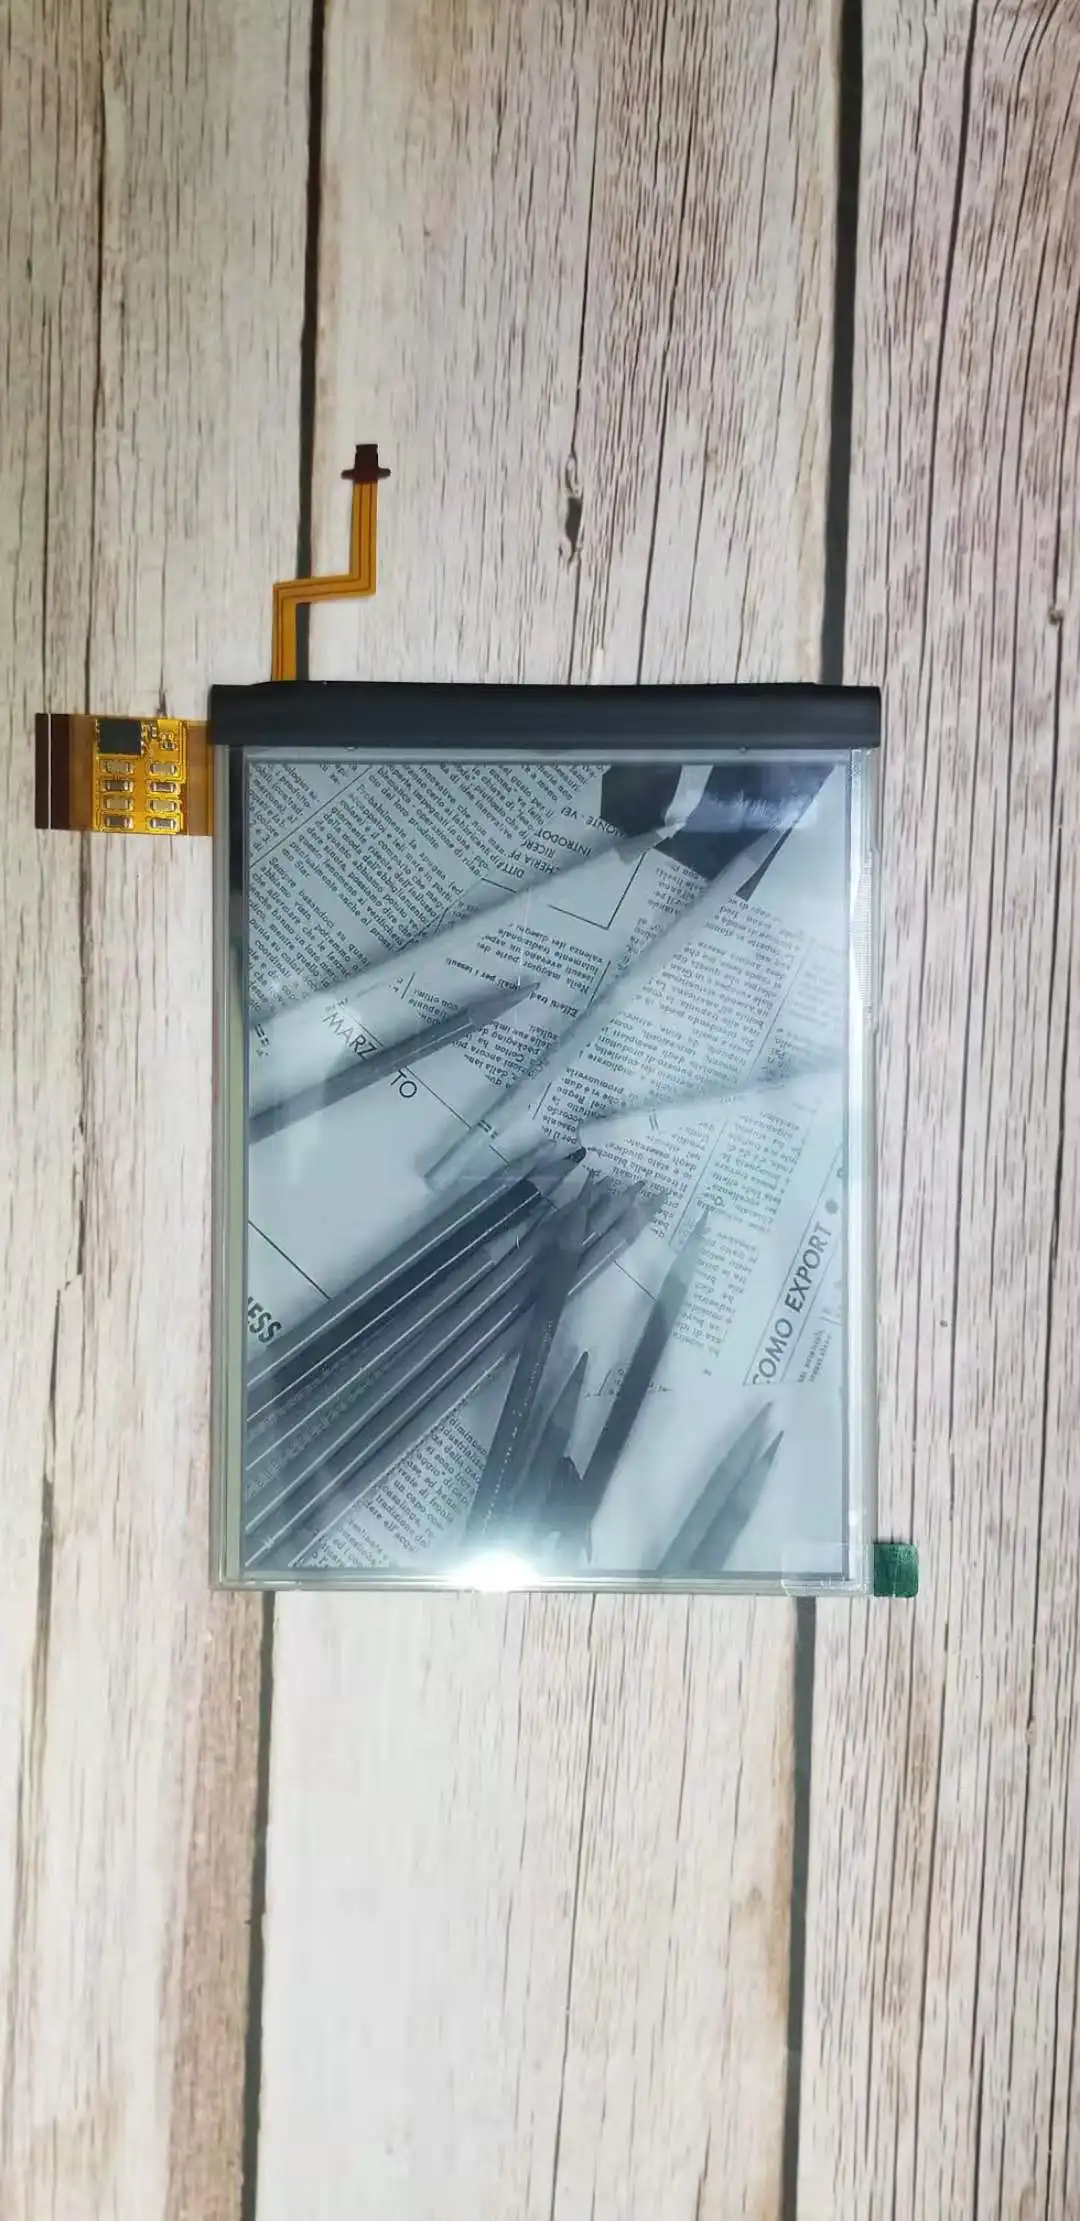 

6" Carta 758 x 1024 LCD Without touch screen for Onyx BOOX Bering 3 Reader LCD display Free shipping